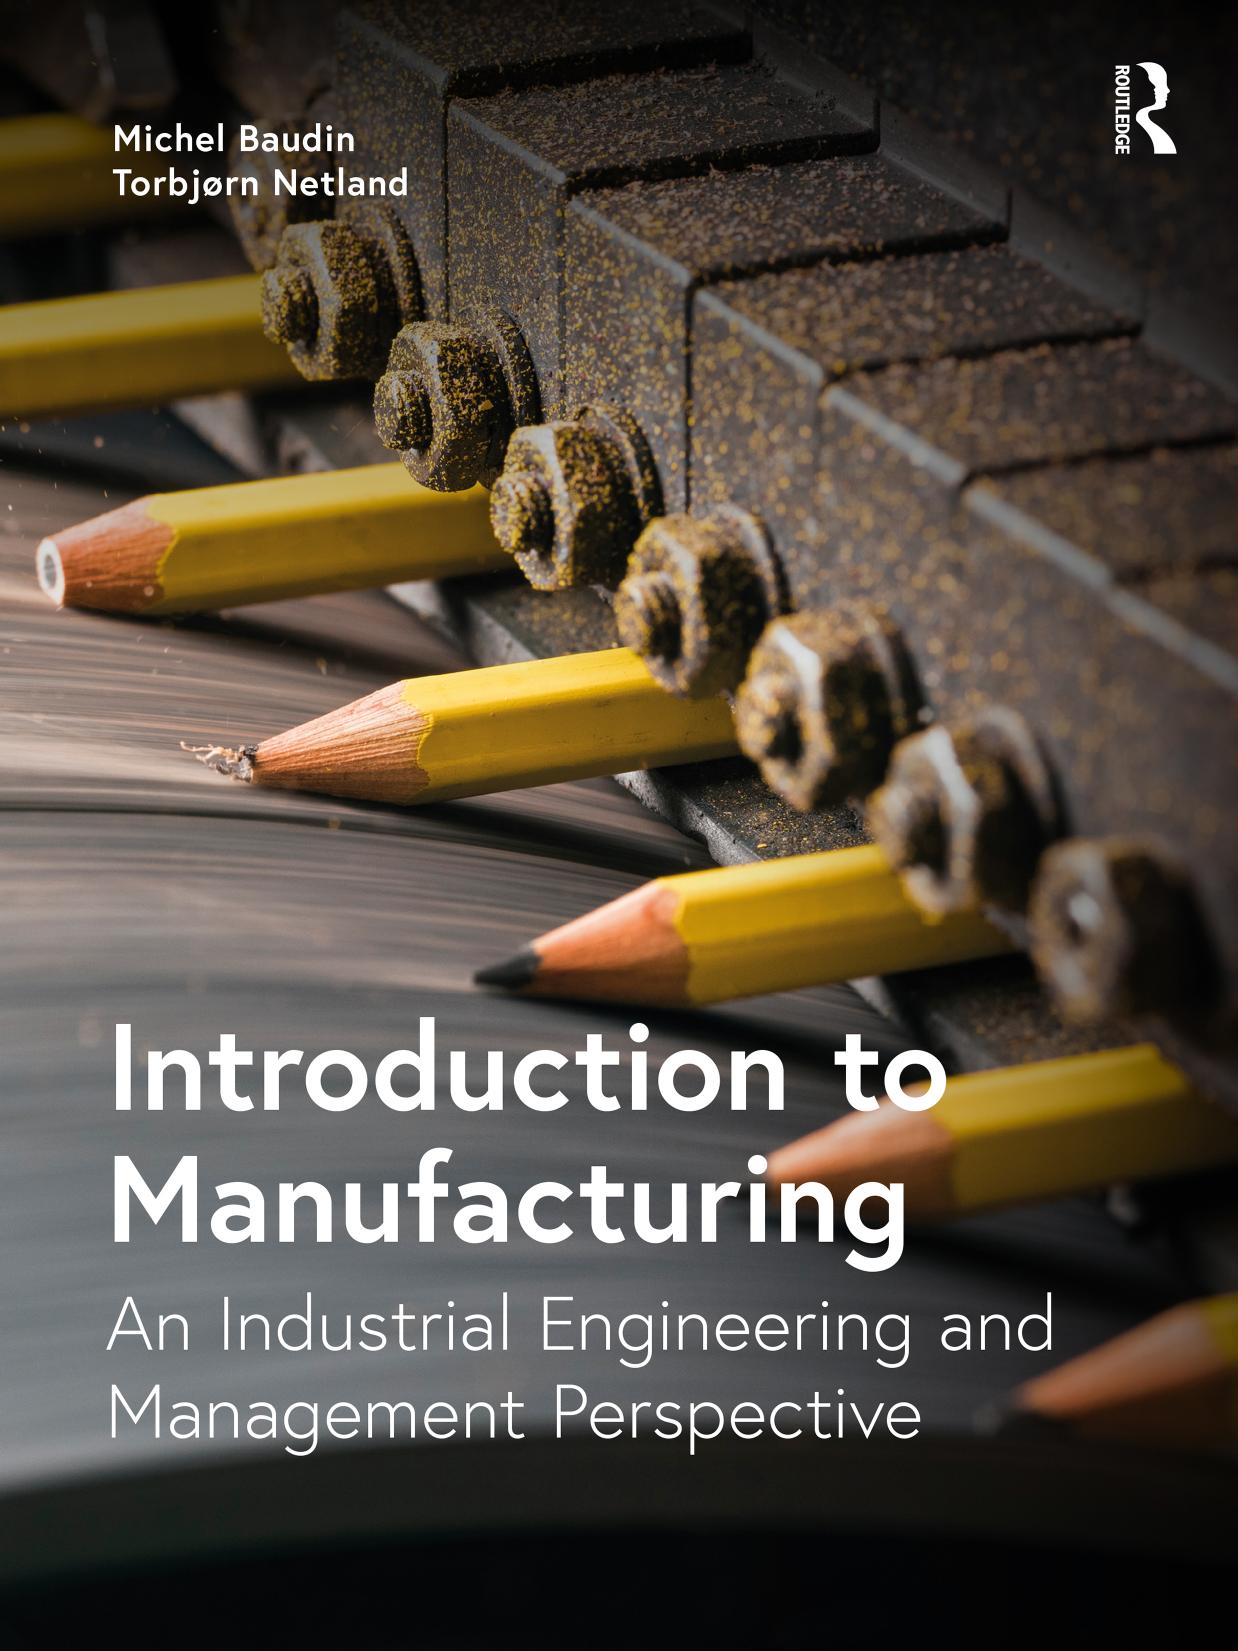 Introduction to Manufacturing: An Industrial Engineering and Management Perspective by Michel Baudin Torbjørn Netland